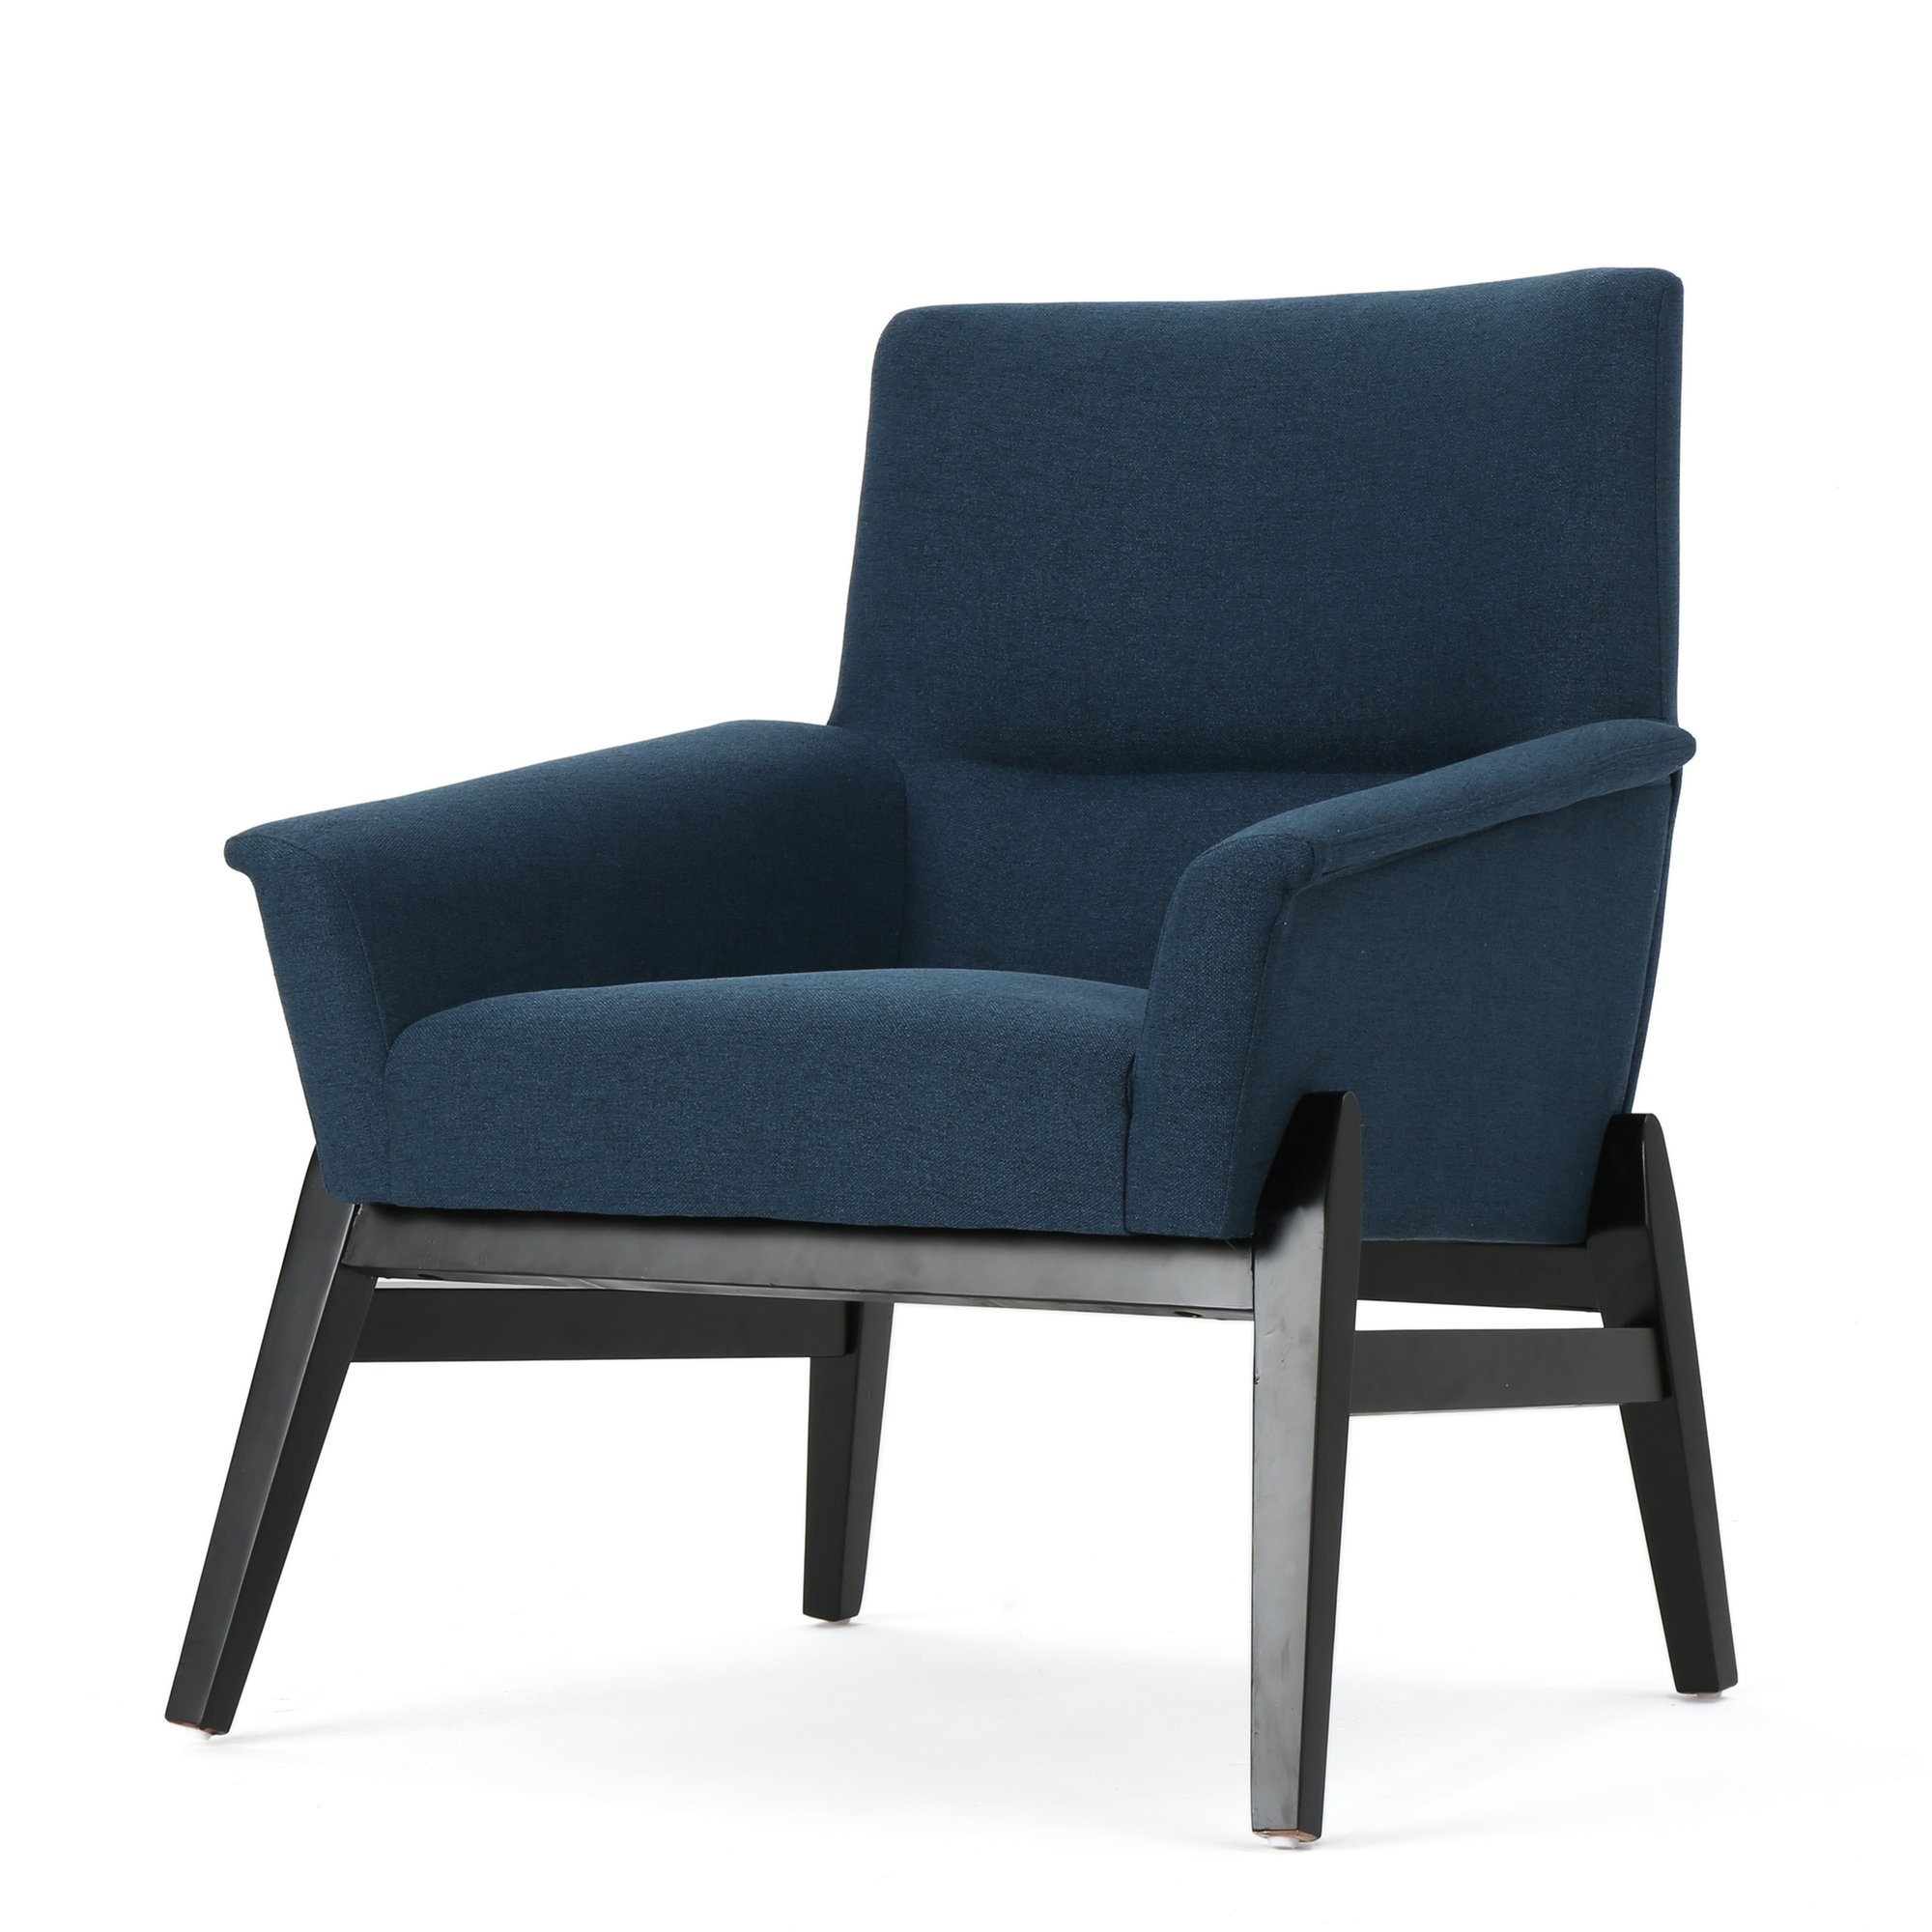 All Modern Fabric Armchair by Langley Street - Image 1